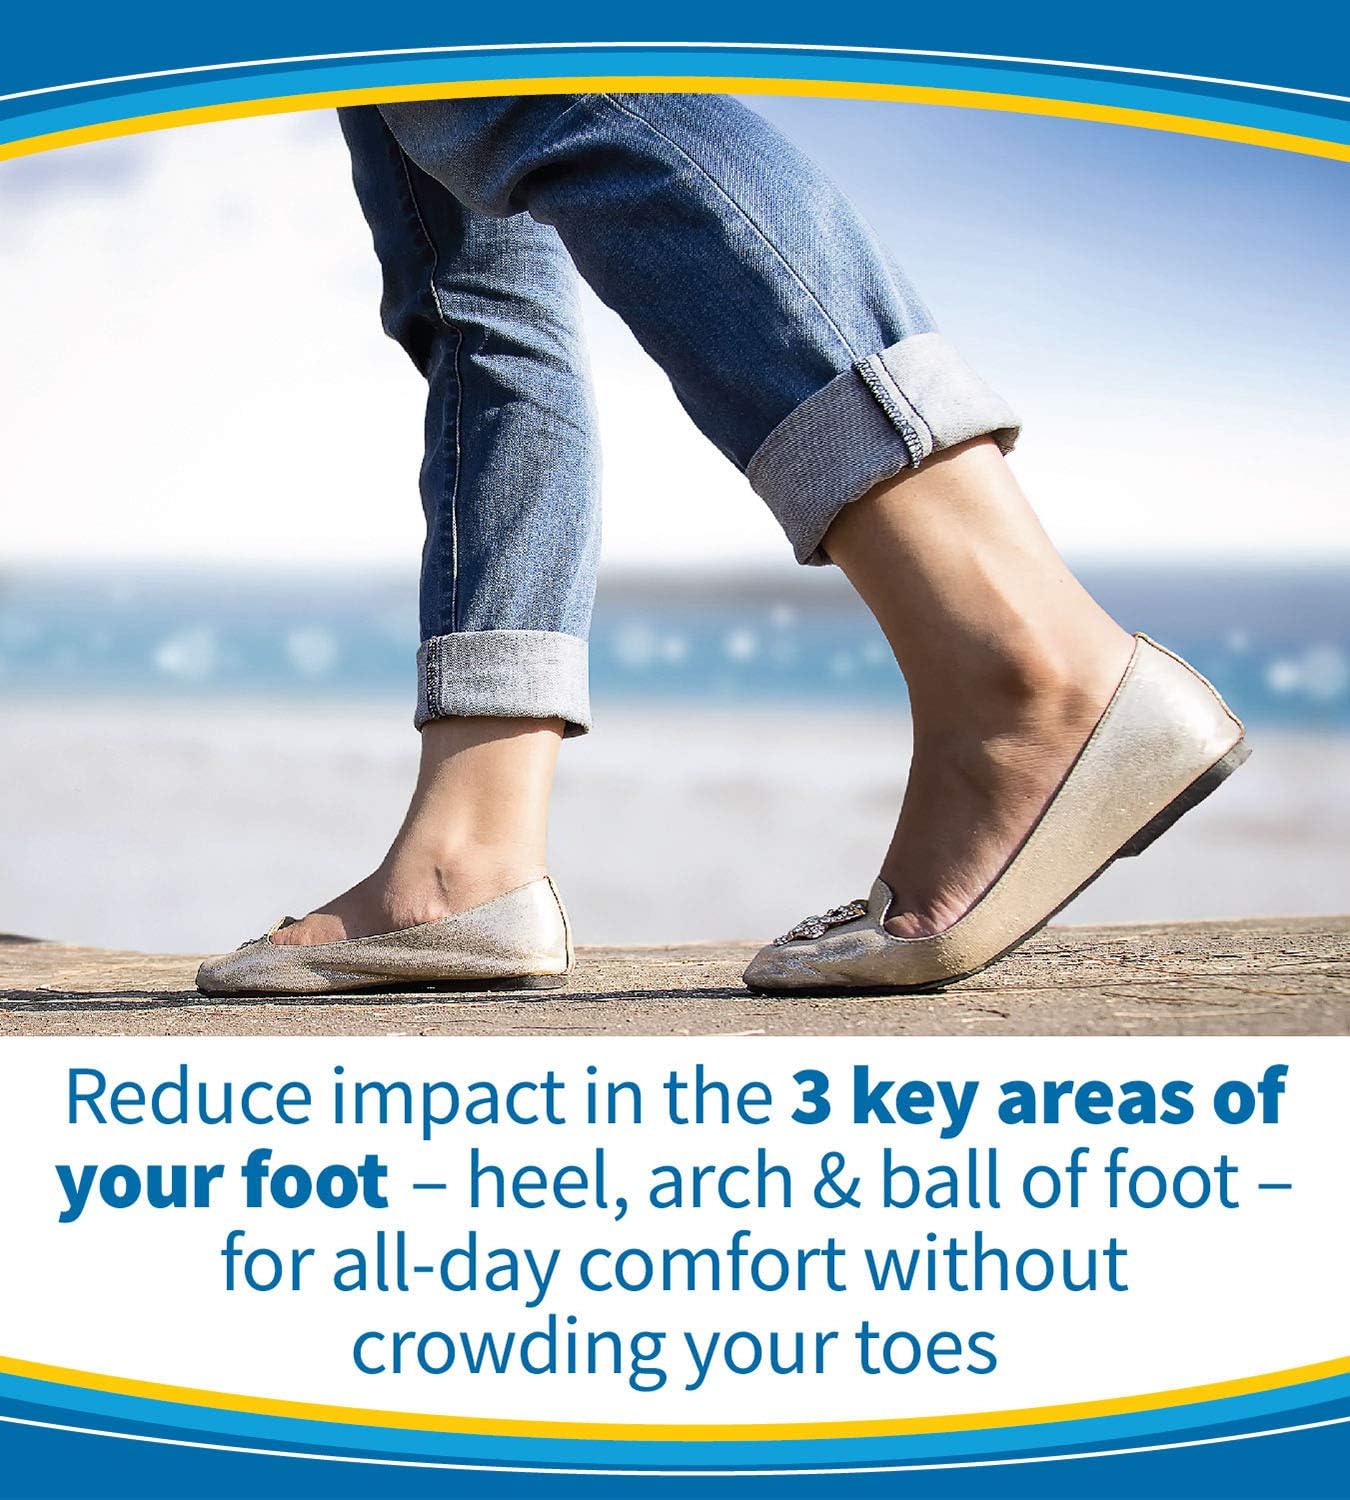 Dr. Scholls Tri-Comfort Insoles // Comfort for Heel, Arch and Ball of Foot with Targeted Cushioning and Arch Support (for Mens 8-14, Also Available Womens 6-10)